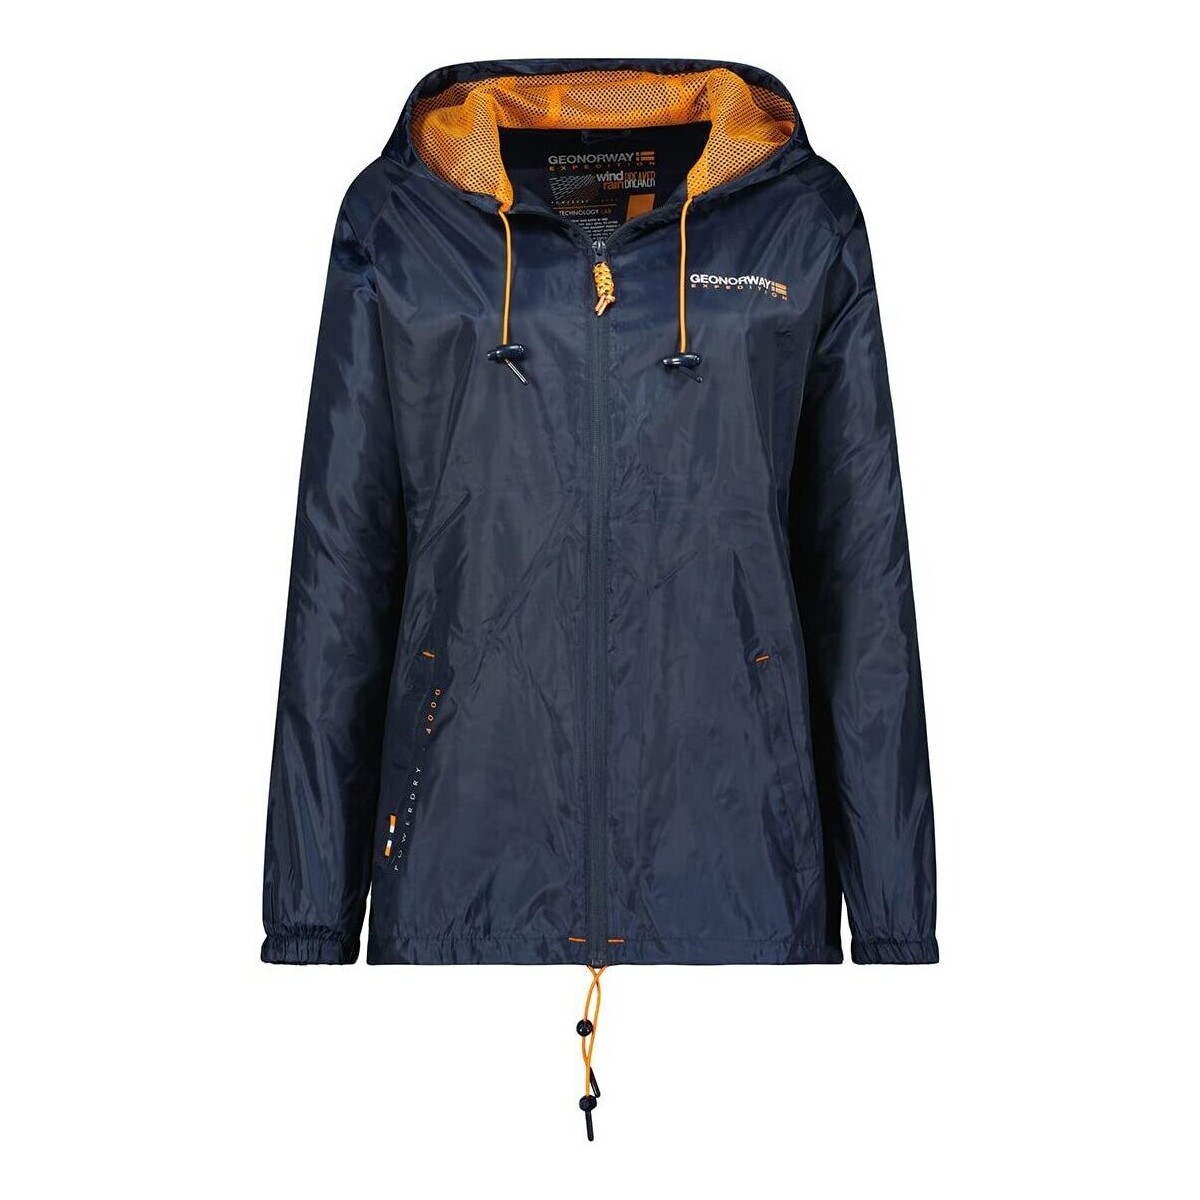 Vêtements Femme Polaires Geographical Norway BOAT Marine